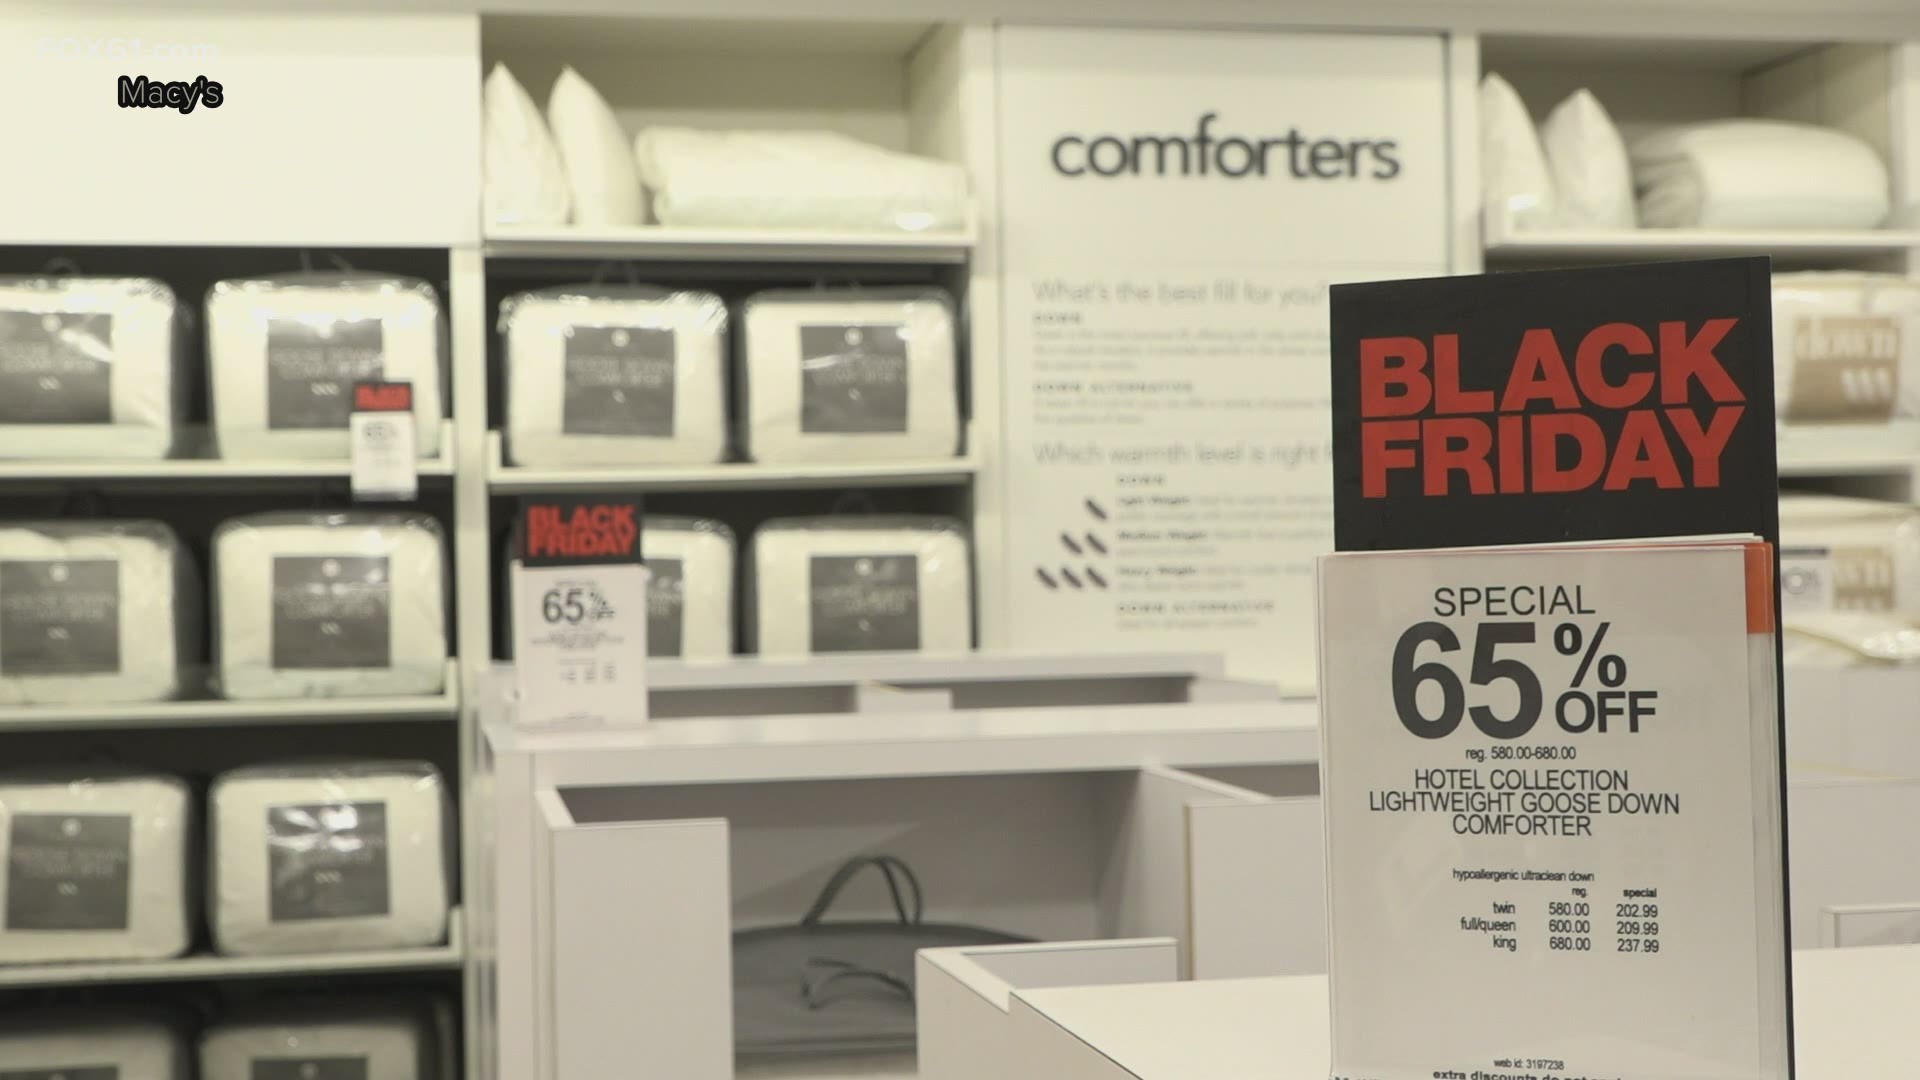 If you're looking for gift ideas, or even those stocking stuffers, one big-box retailer says it's got you covered!